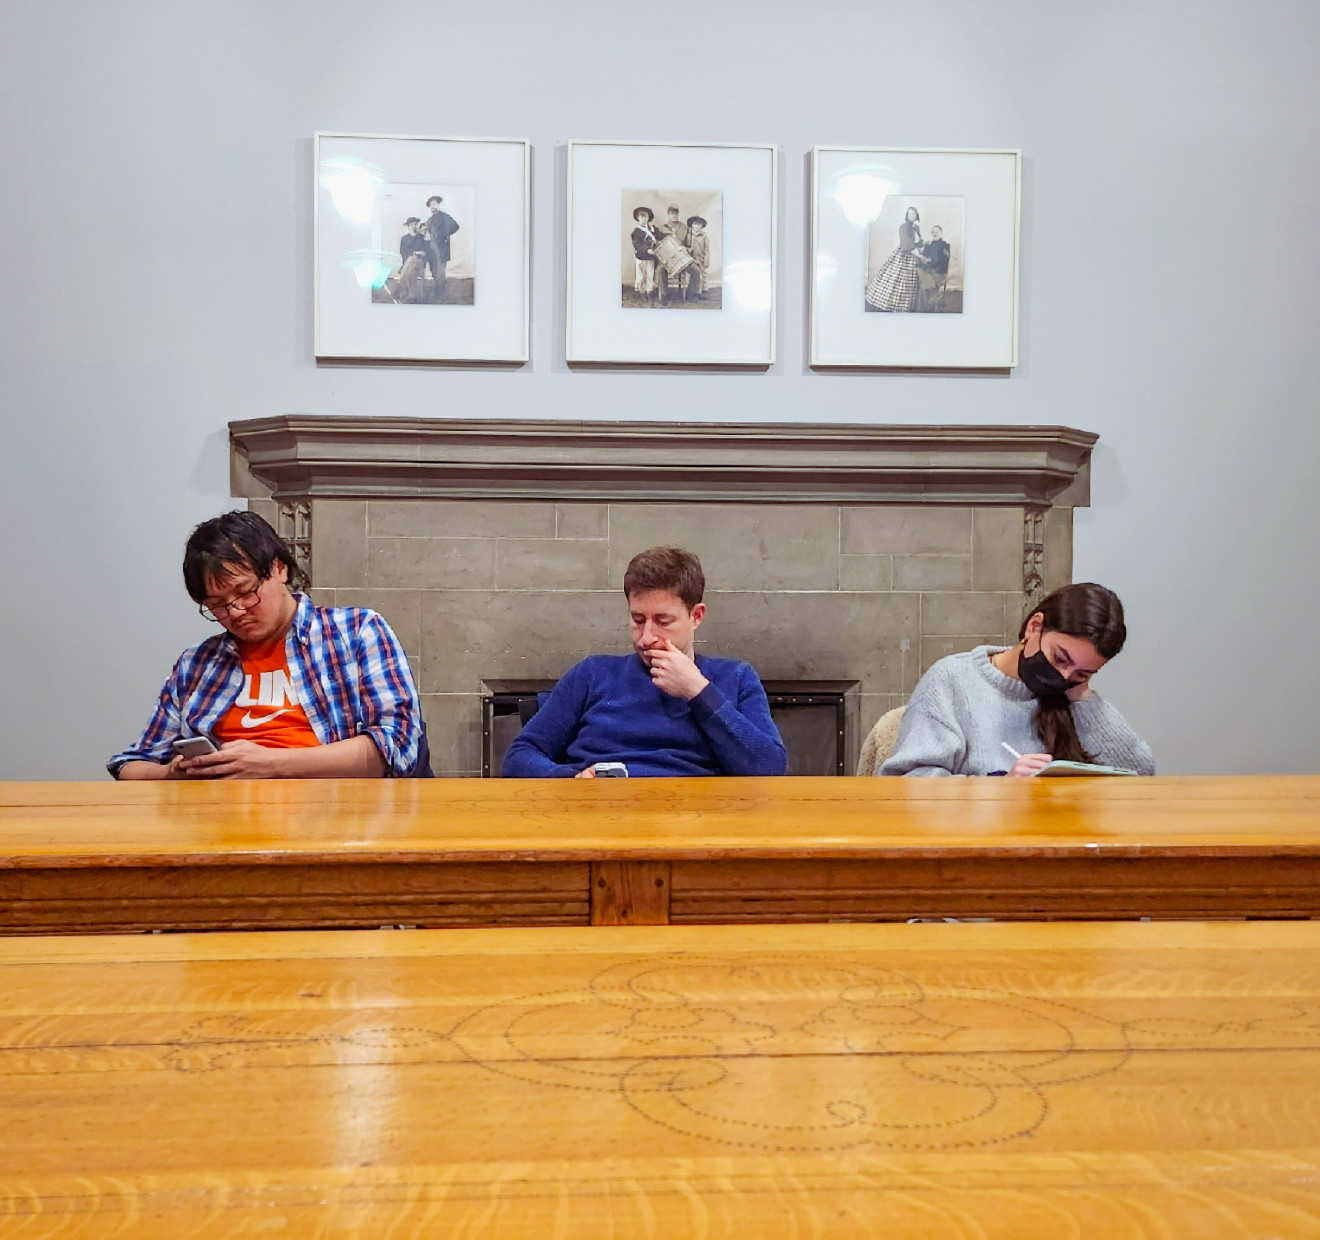 Three students sitting behind a desk and in front of a fireplace with three framed photographs above it, engaging with their cellular devices.